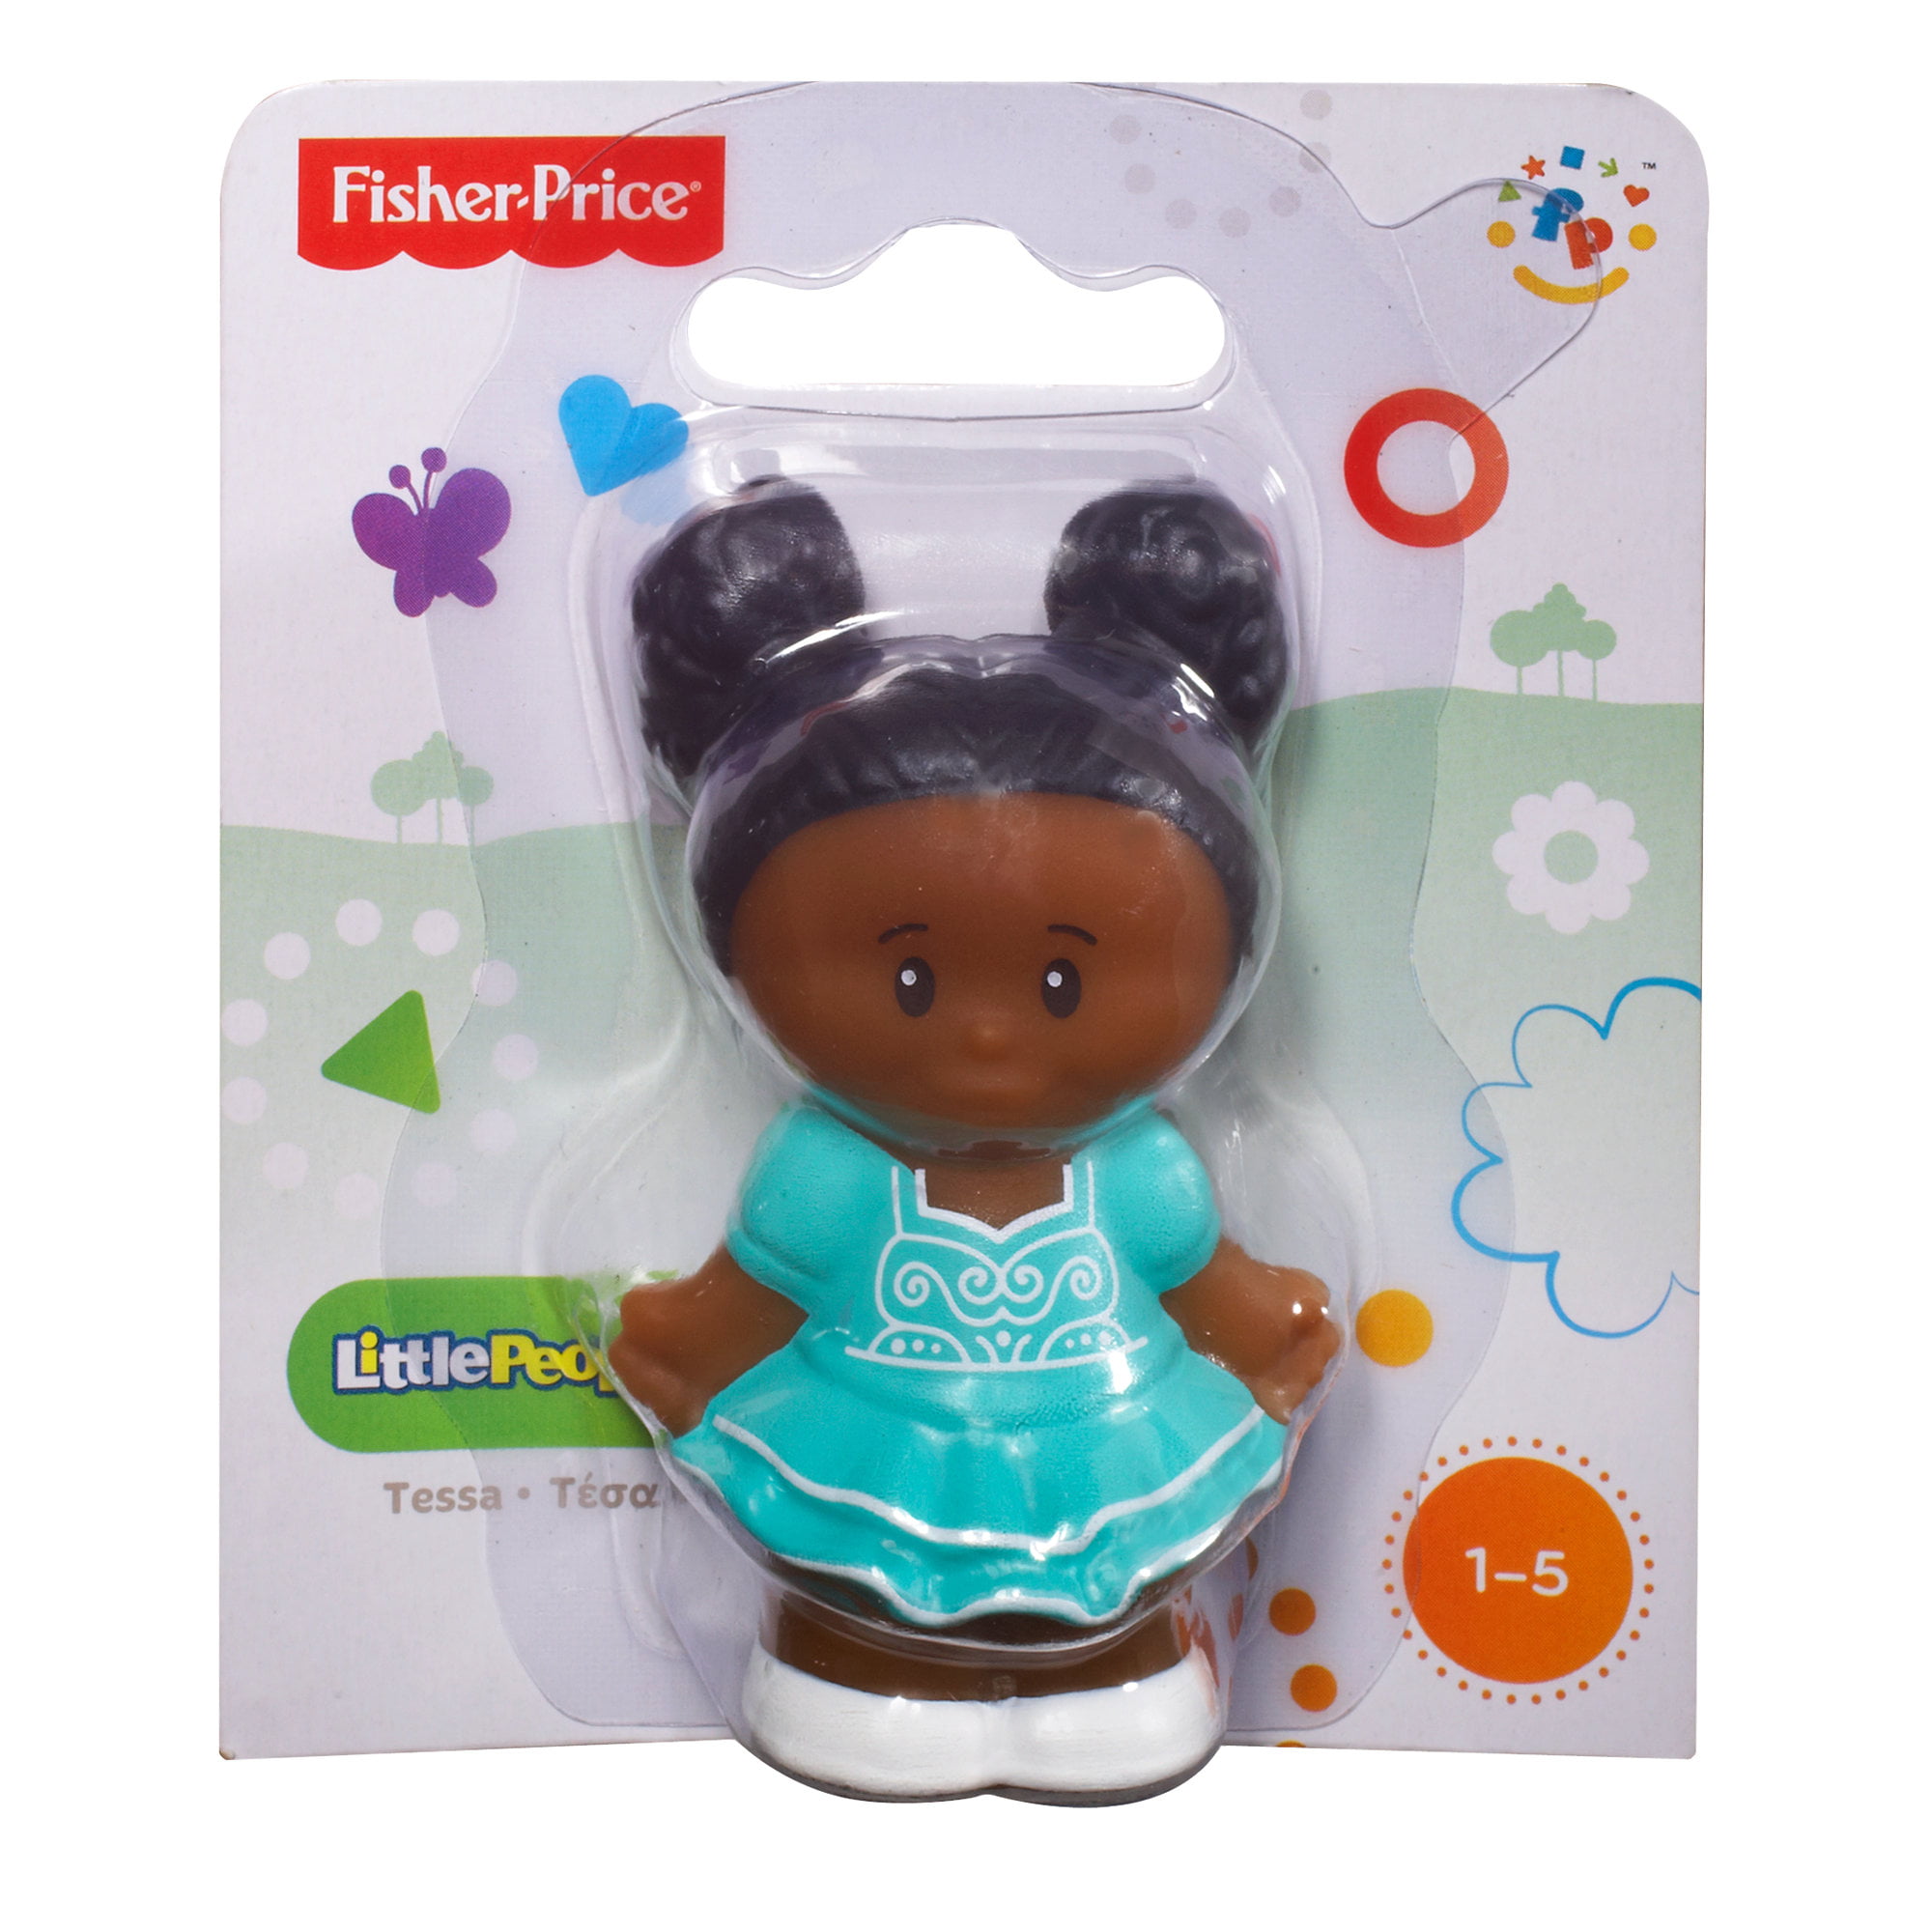 Fisher Price Little People SOCCER GIRL TESSA in PINK UNIFORM African American 